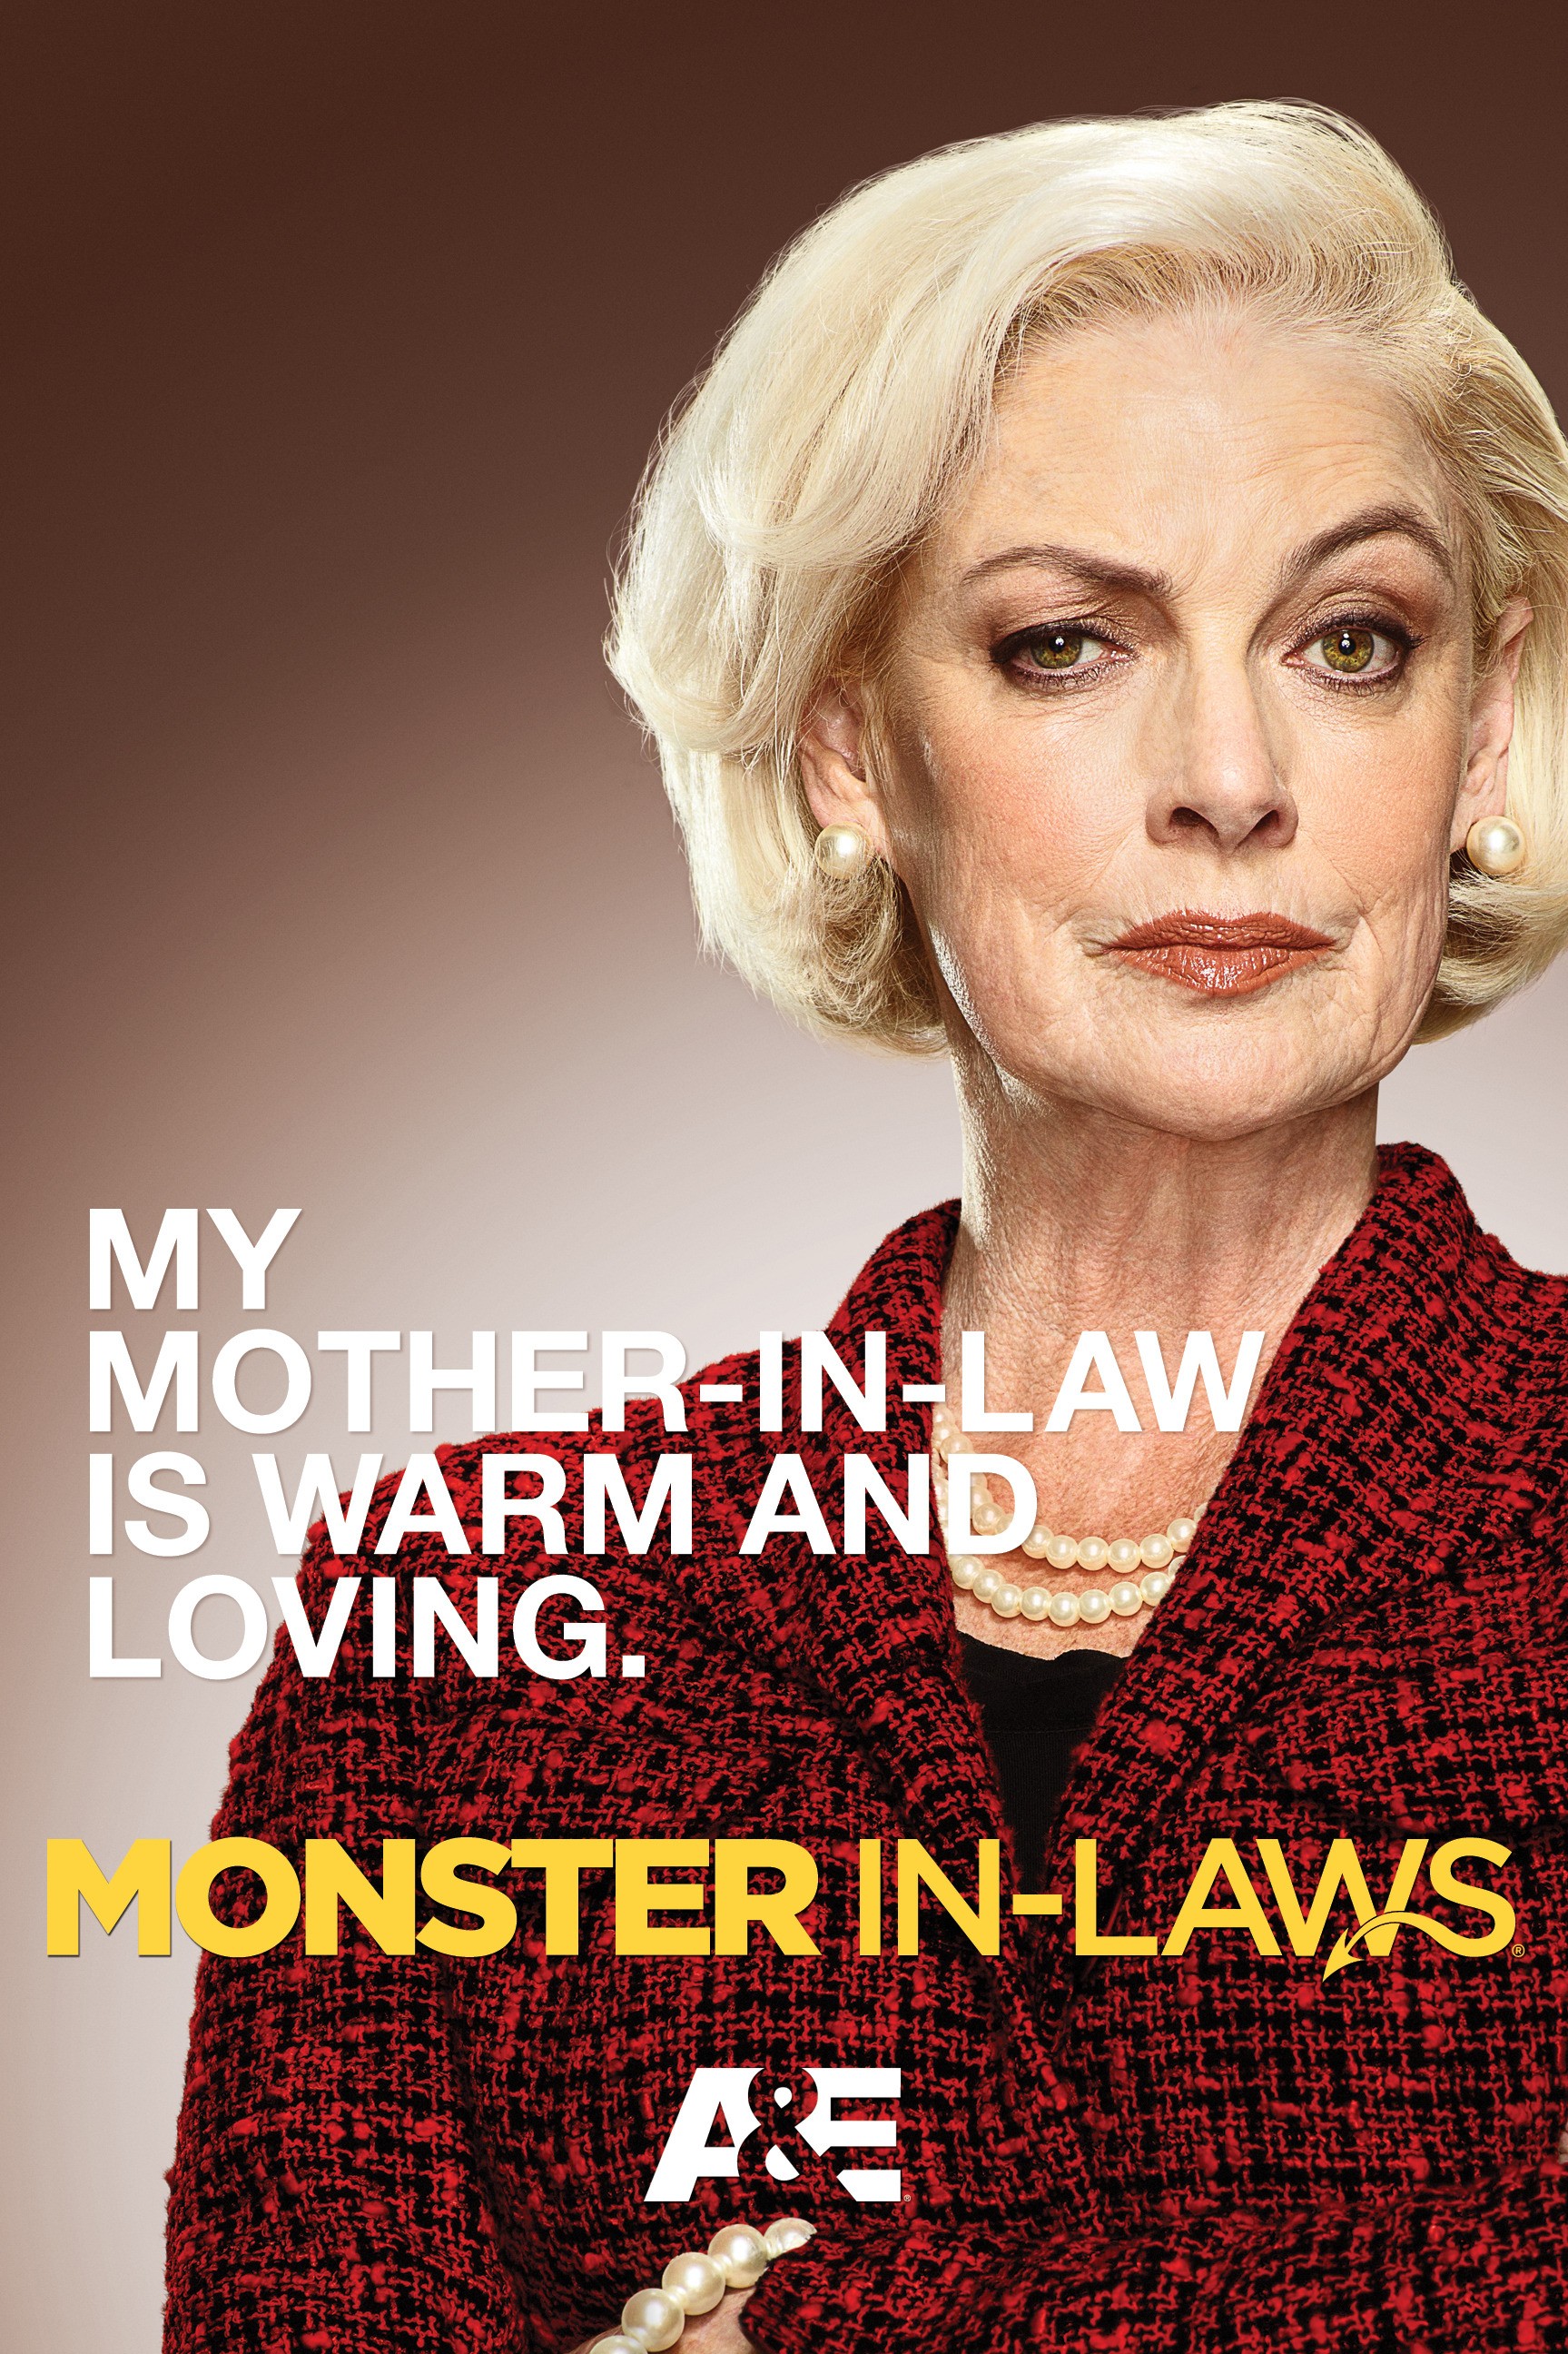 Mega Sized TV Poster Image for Monster in-Laws (#1 of 2)